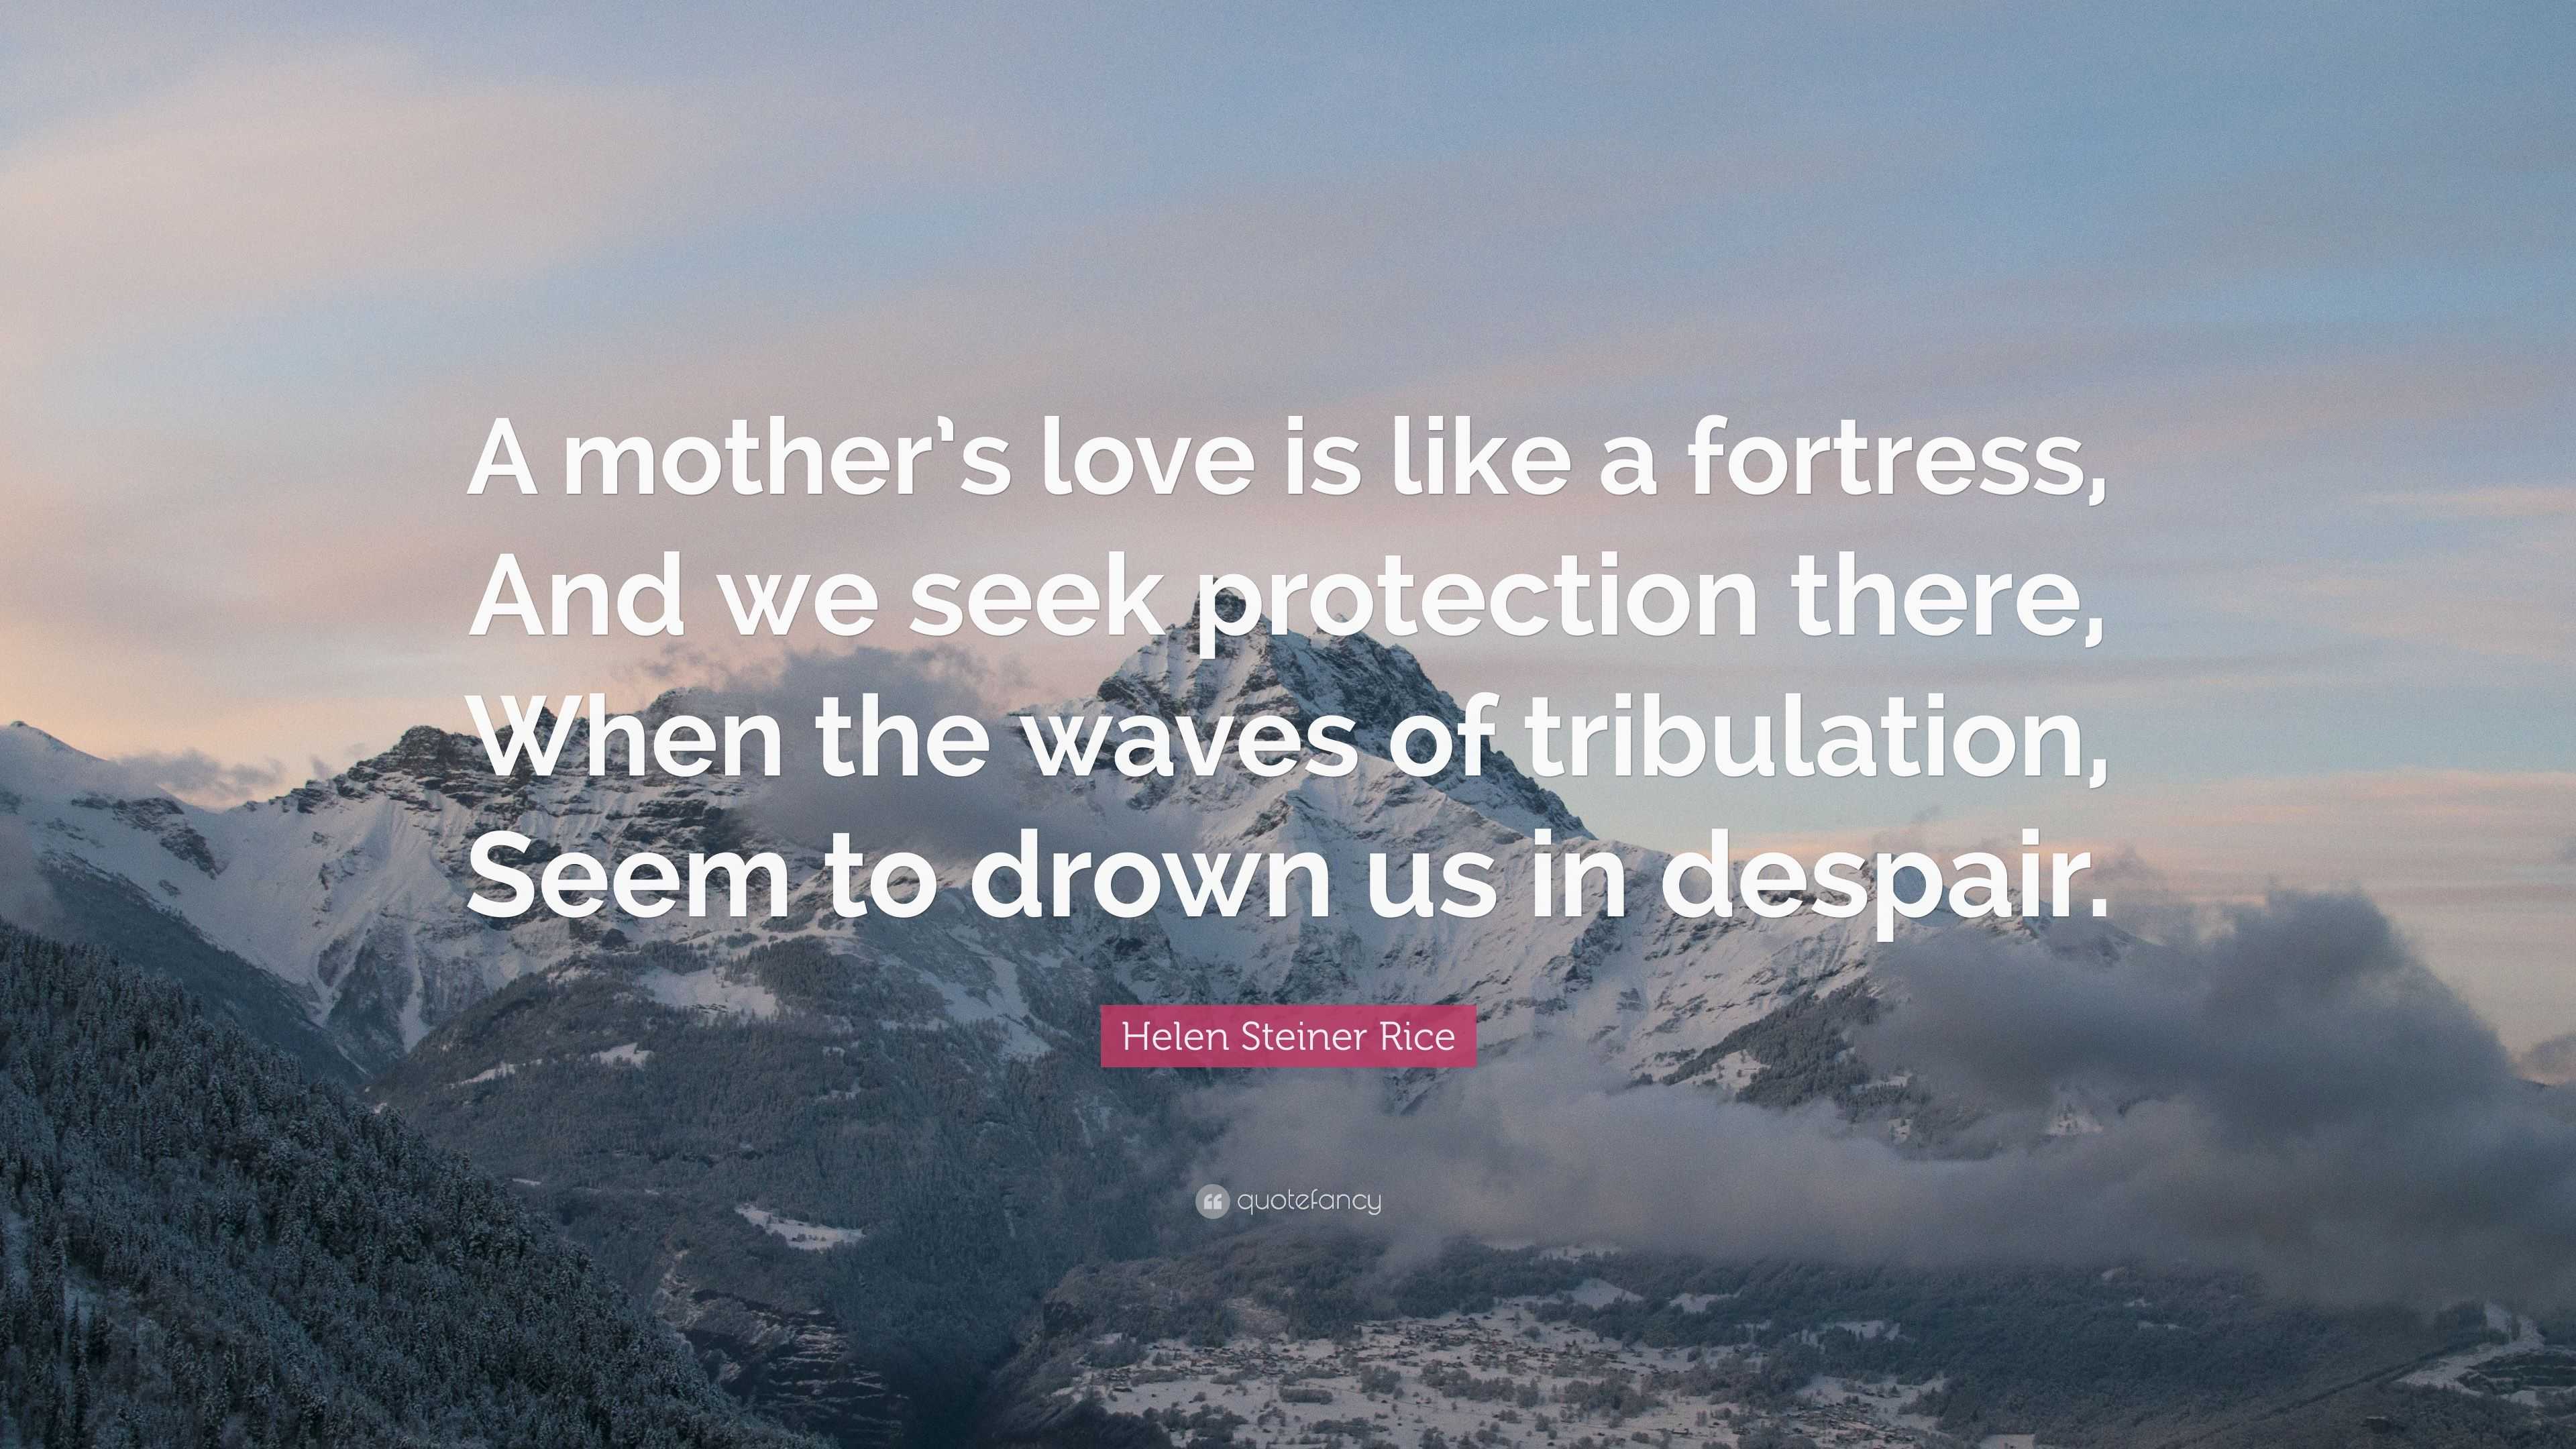 Helen Steiner Rice Quote “A mother’s love is like a fortress, And we